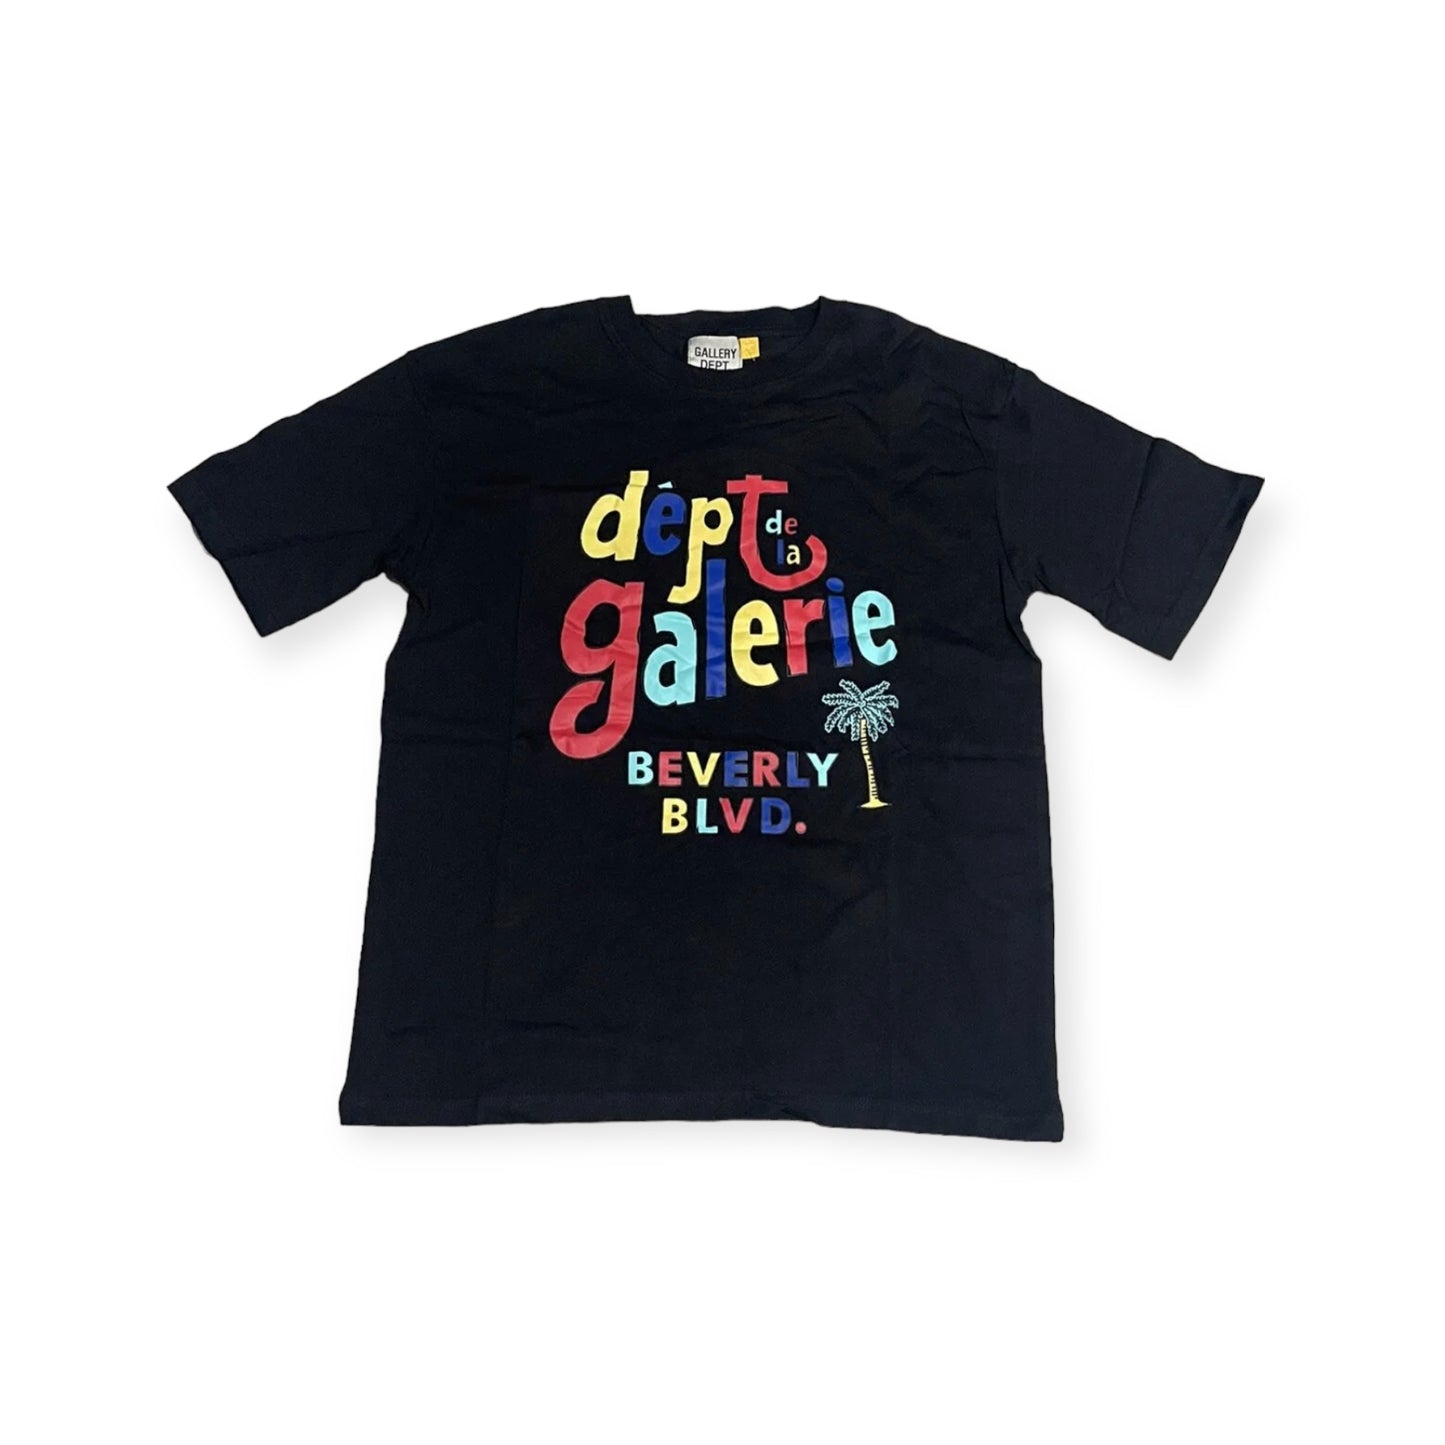 Brand New Gallery Dept Tee Size L